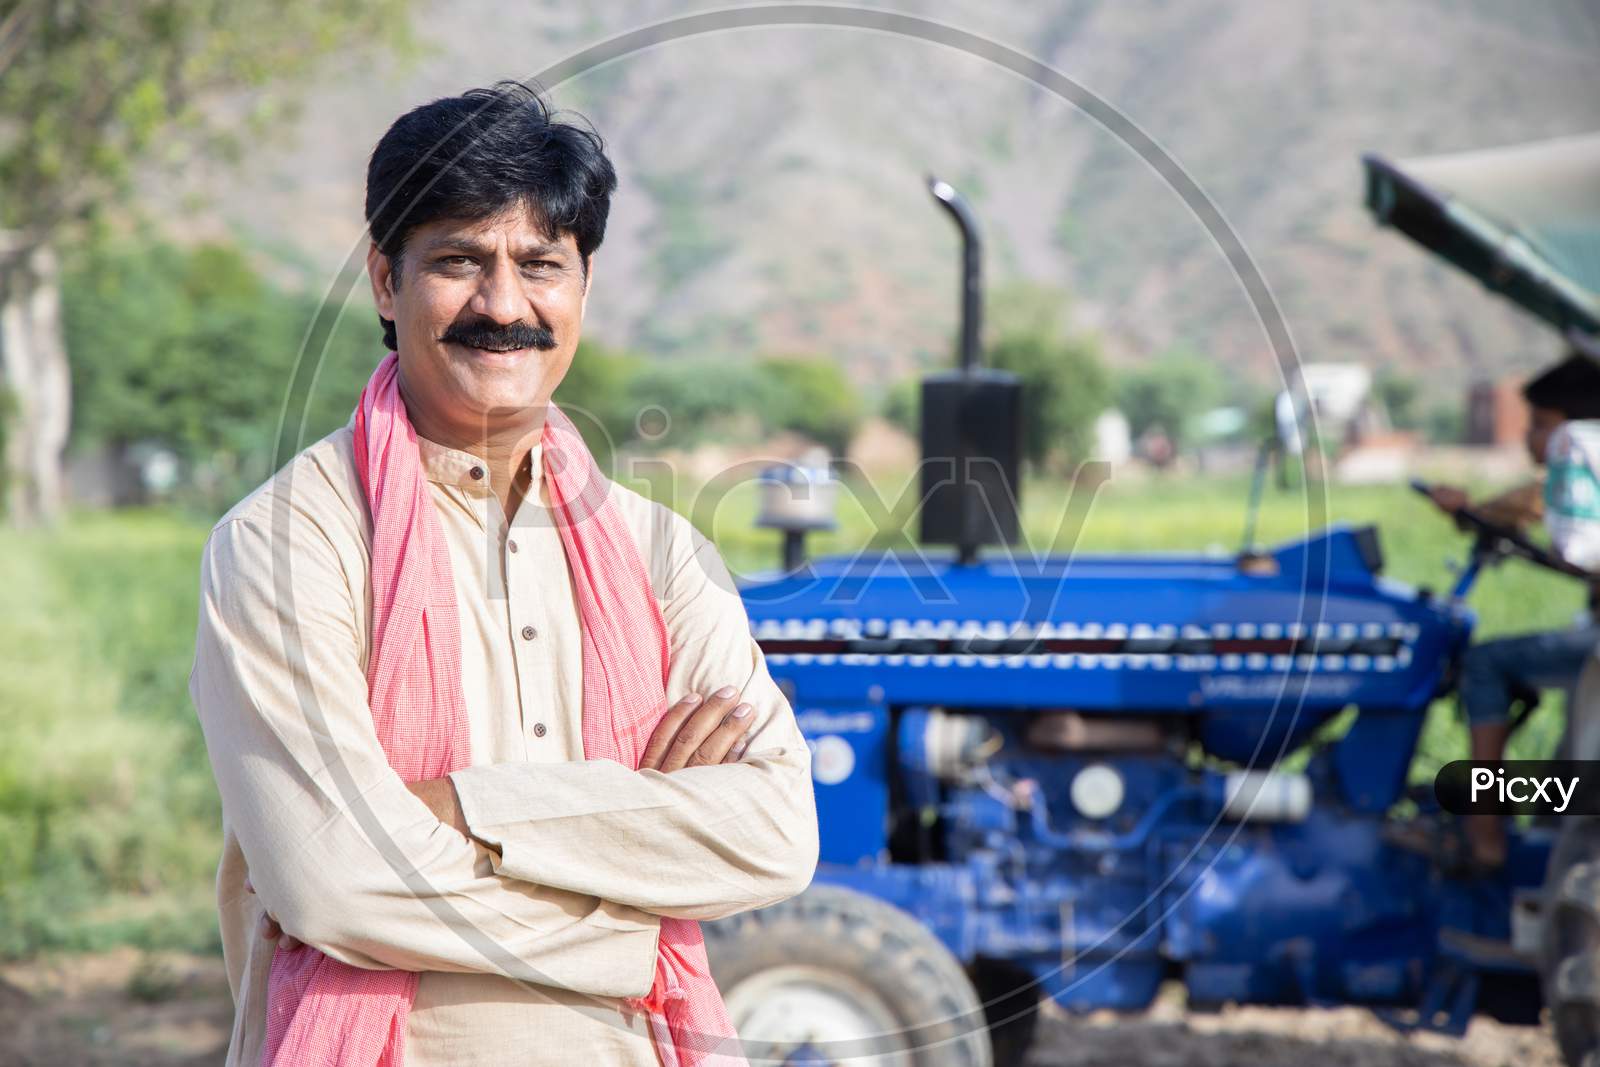 Portrait Of Young Happy Indian Farmer Standing With Blue Tractor At Agriculture Field. Man With Cross Arms Wearing Traditional Kurta Smiling Looking At Camera. Rural India Concept.